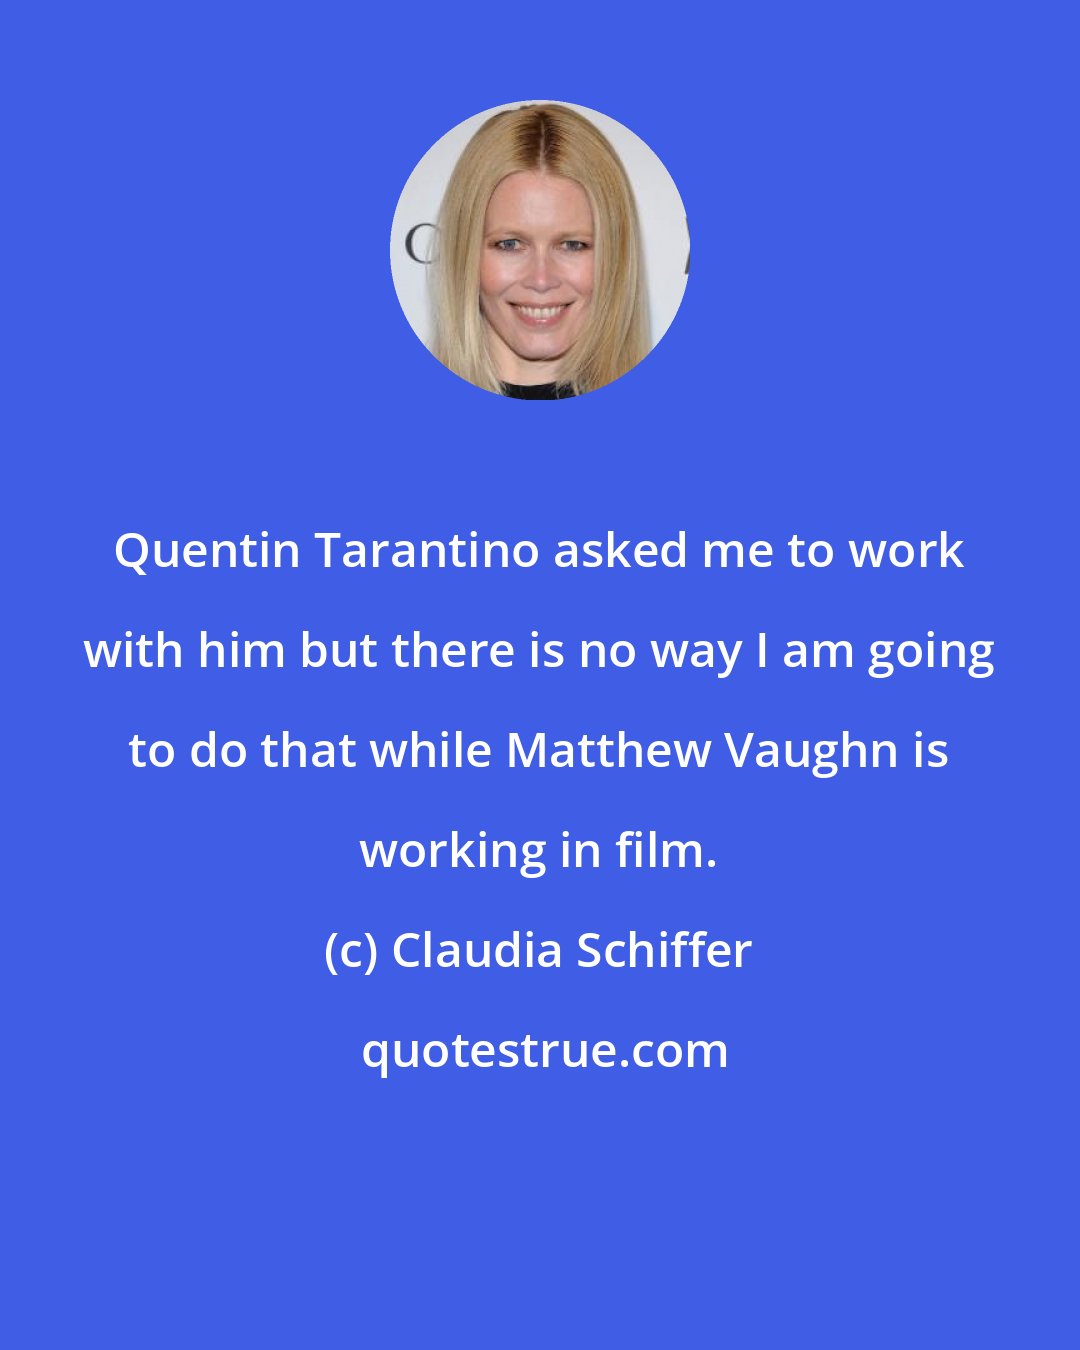 Claudia Schiffer: Quentin Tarantino asked me to work with him but there is no way I am going to do that while Matthew Vaughn is working in film.